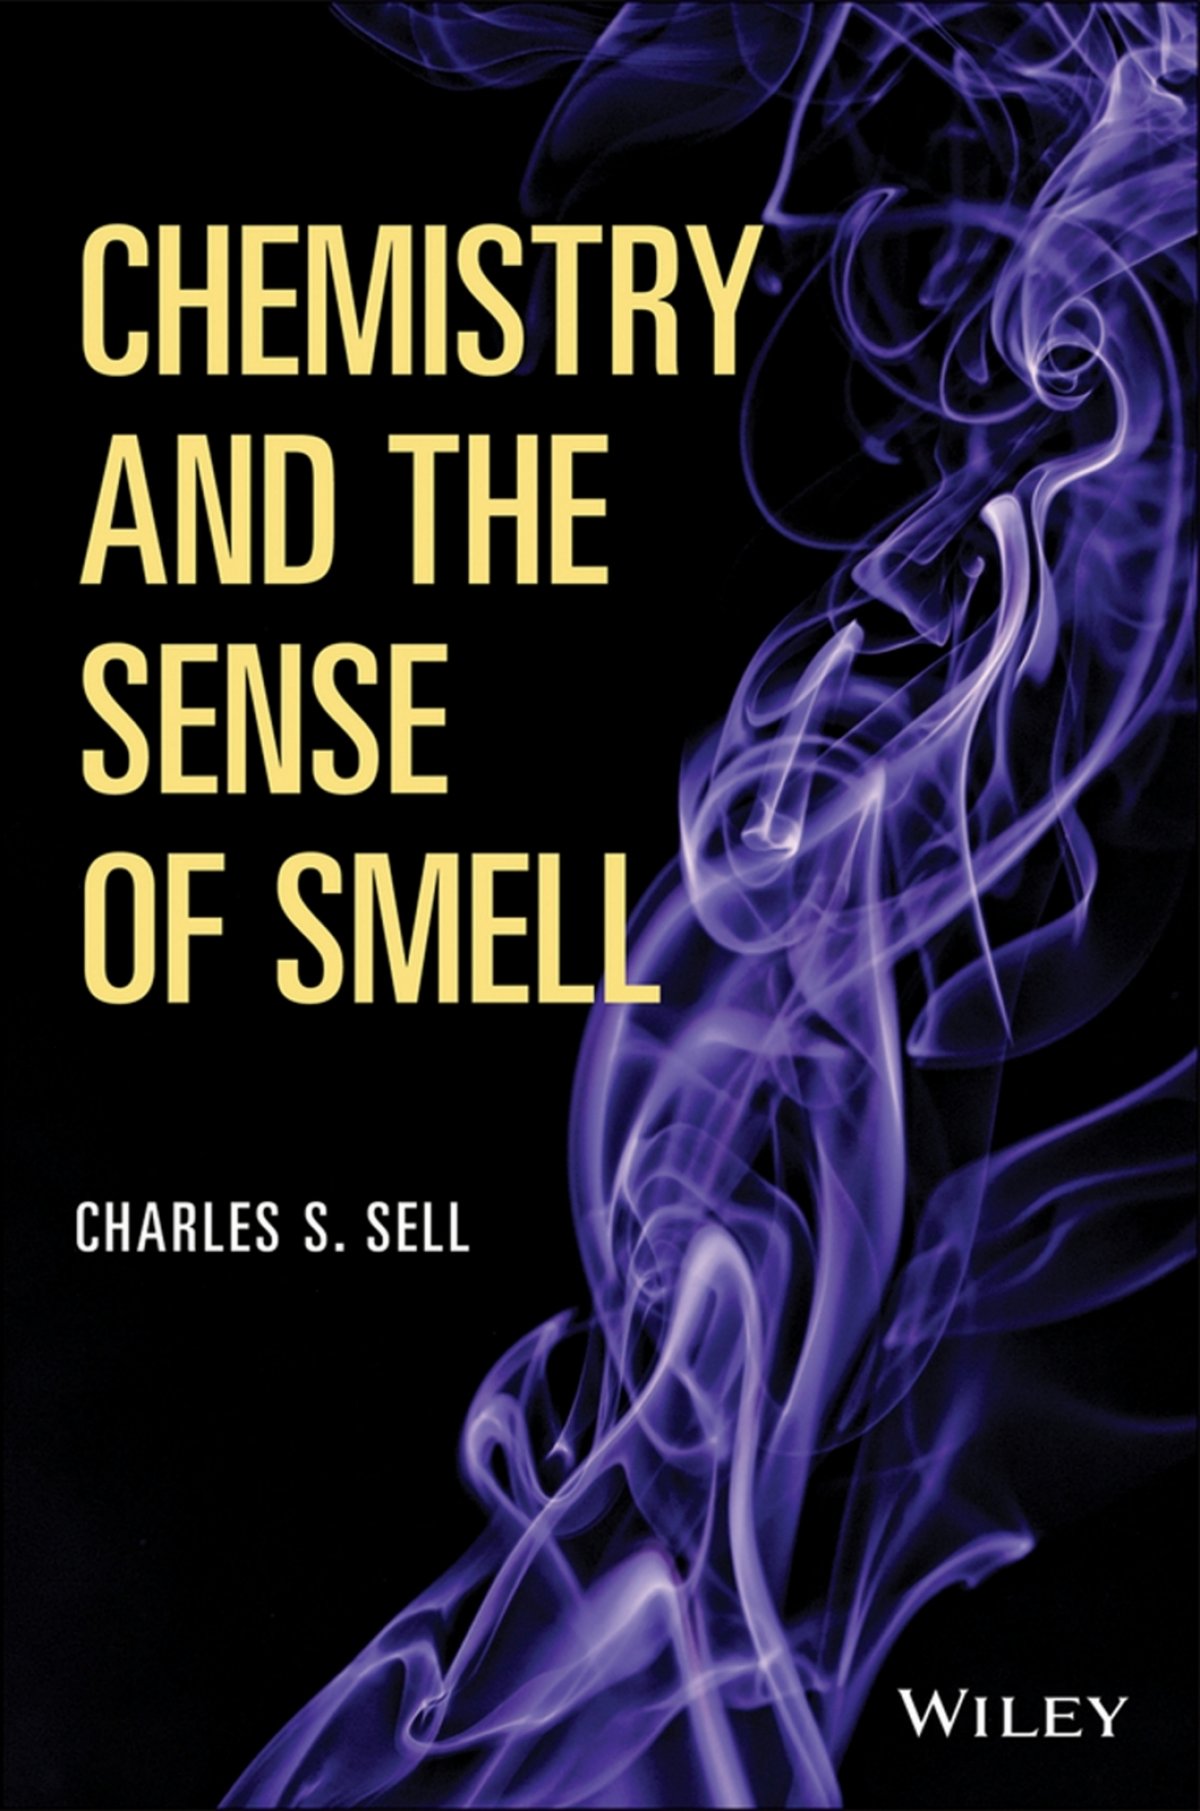 Chemistry and the Sense of Smell ( PDFDrive )